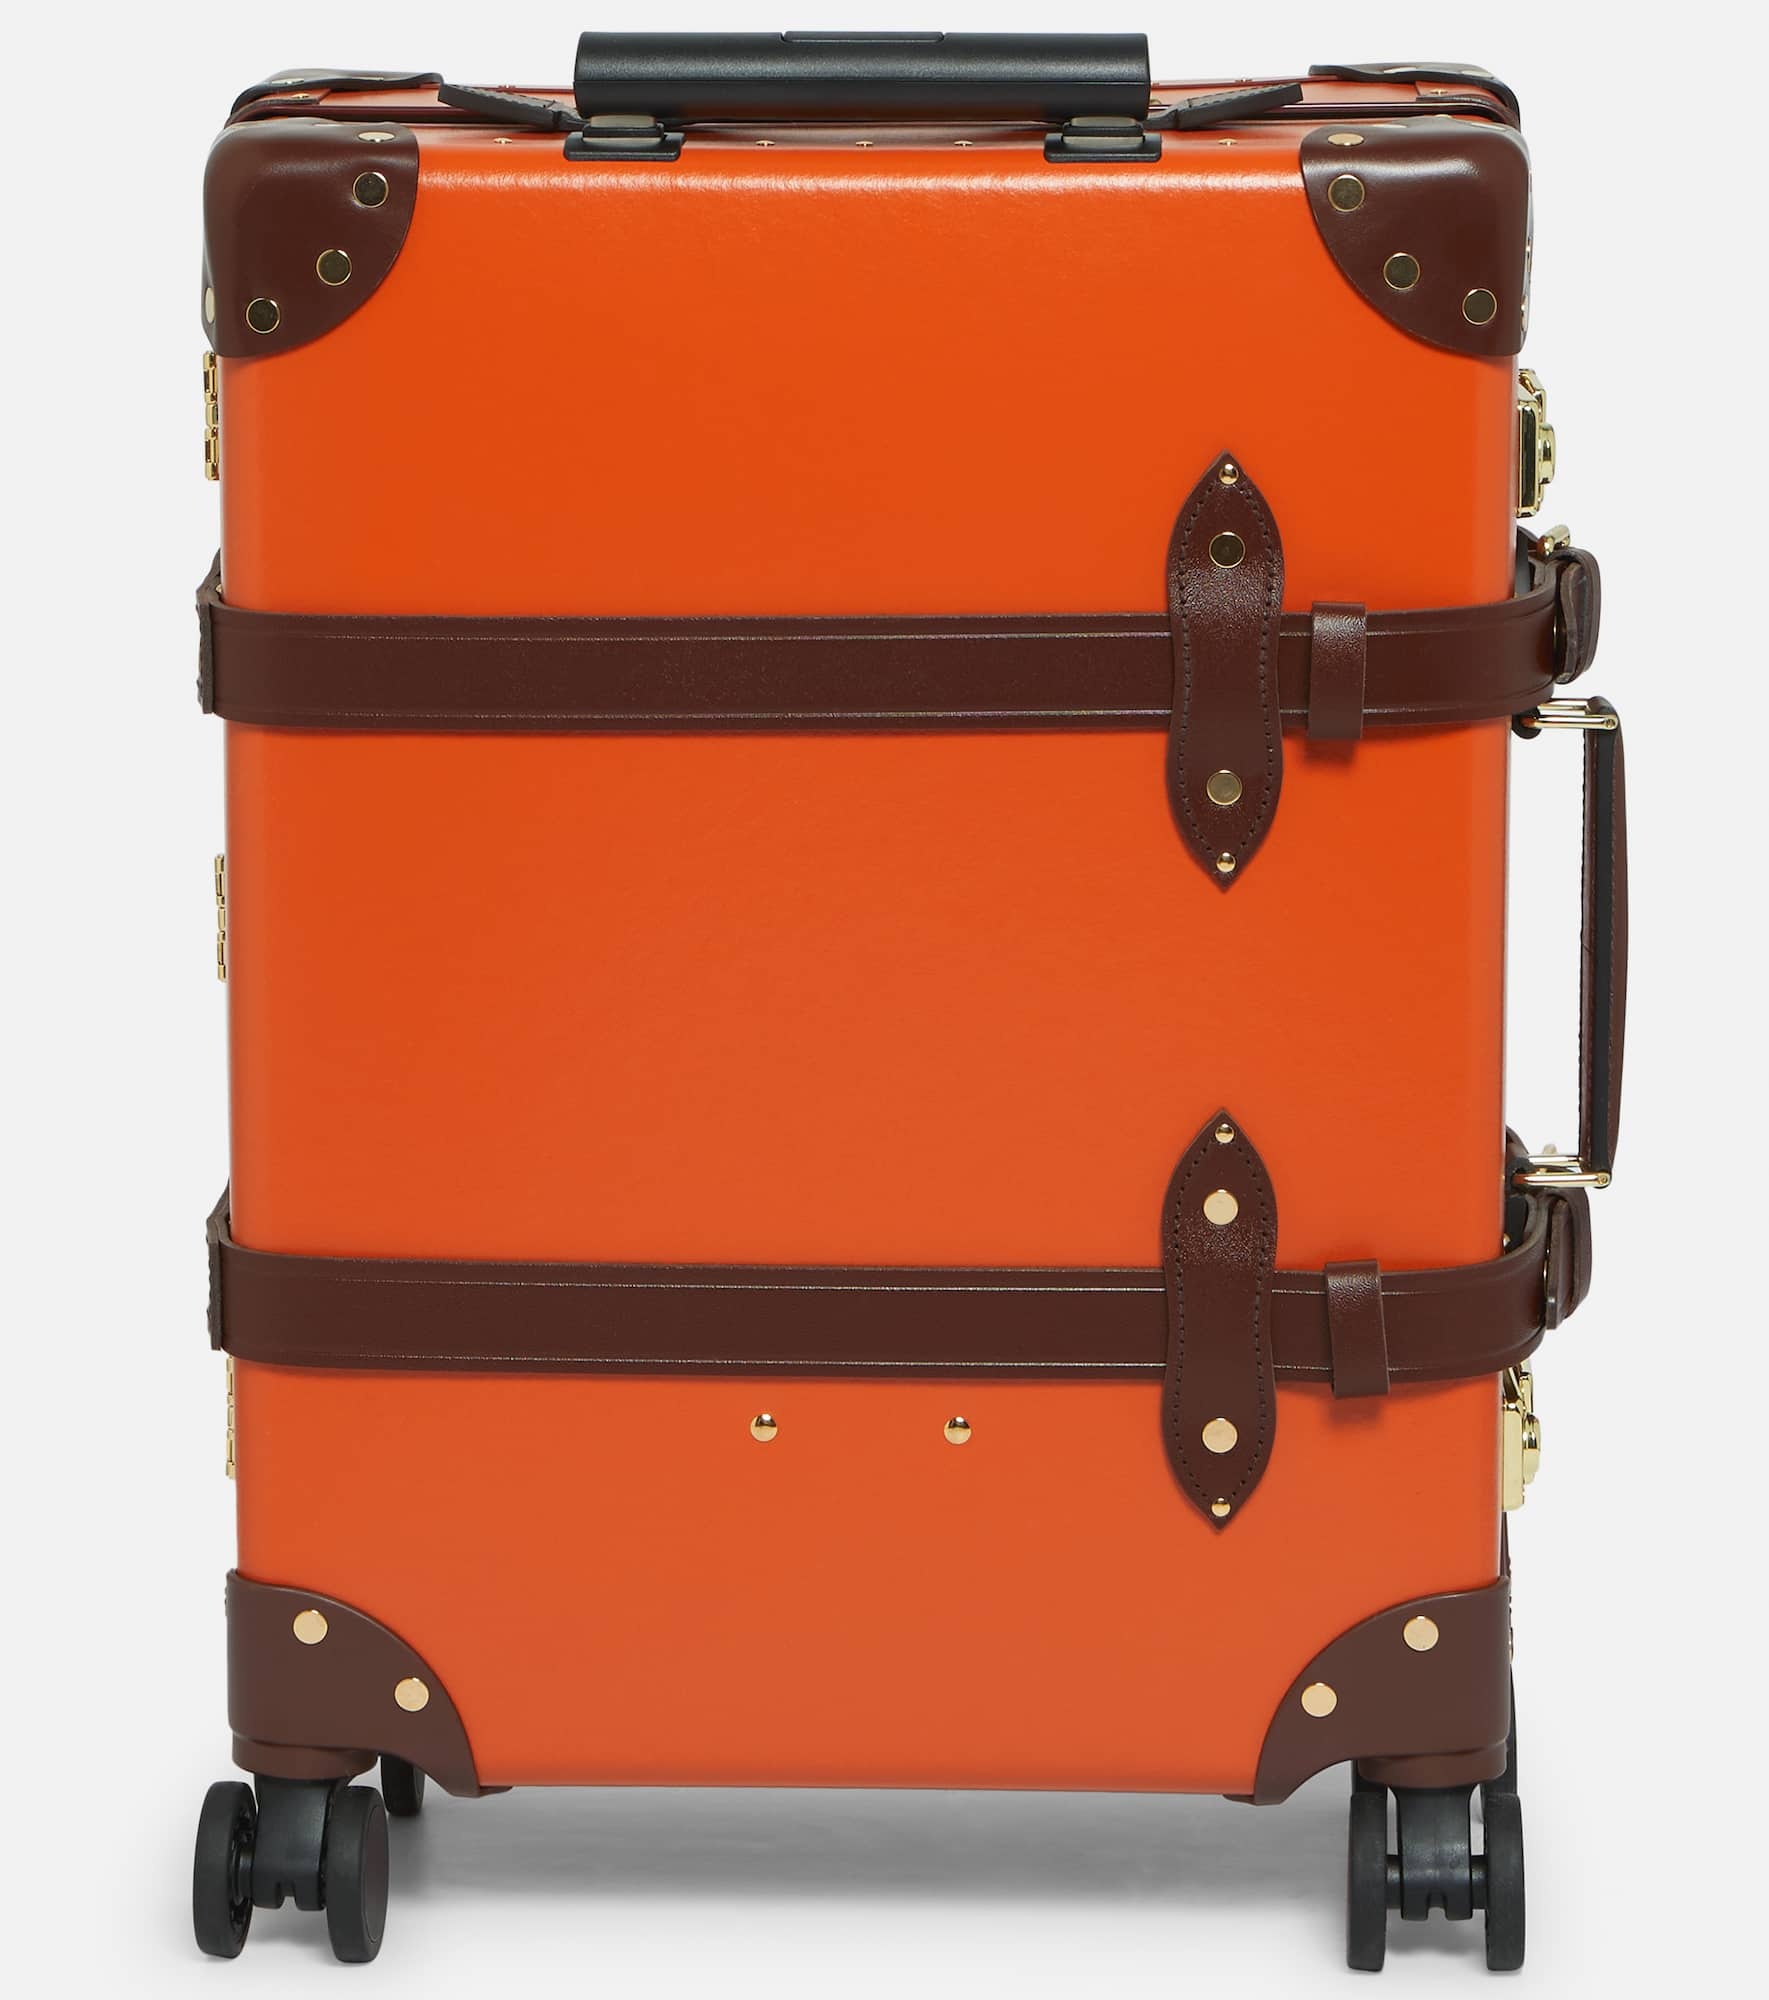 Centenary carry-on suitcase - 3